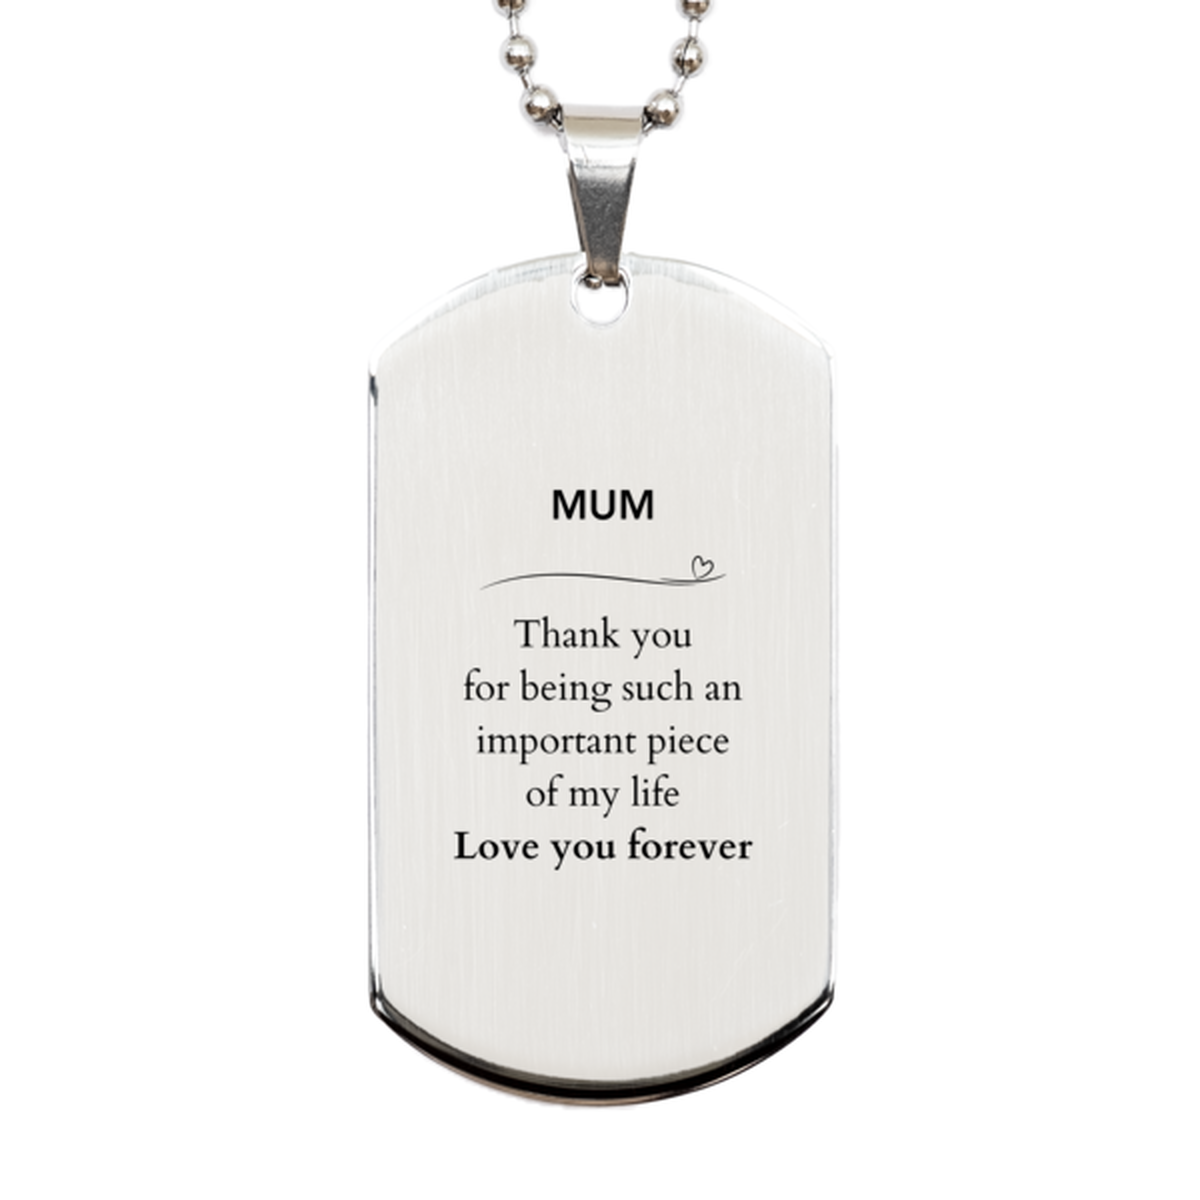 Appropriate Mum Silver Dog Tag Epic Birthday Gifts for Mum Thank you for being such an important piece of my life Mum Christmas Mothers Fathers Day